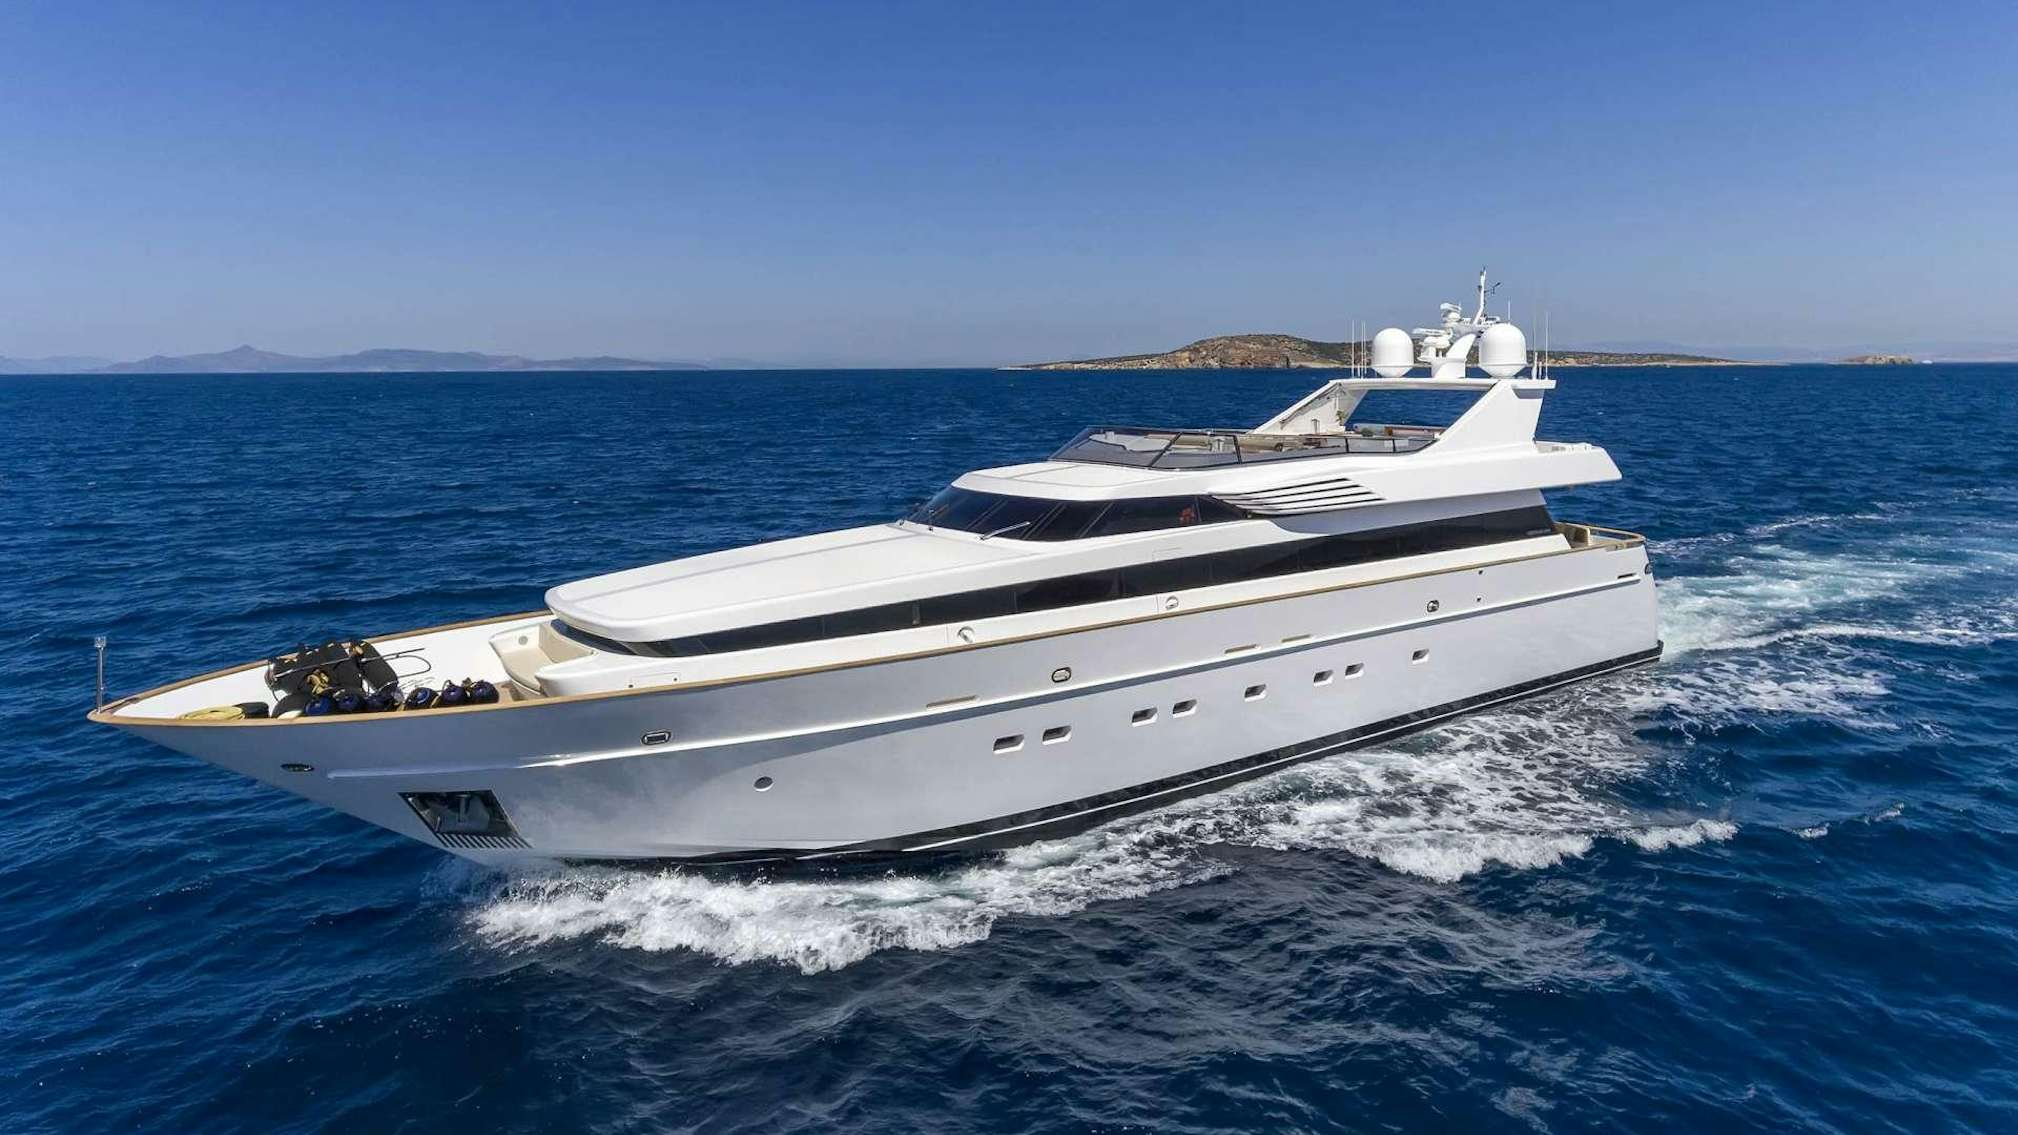 Watch Video for ALEXIA AV Yacht for Charter